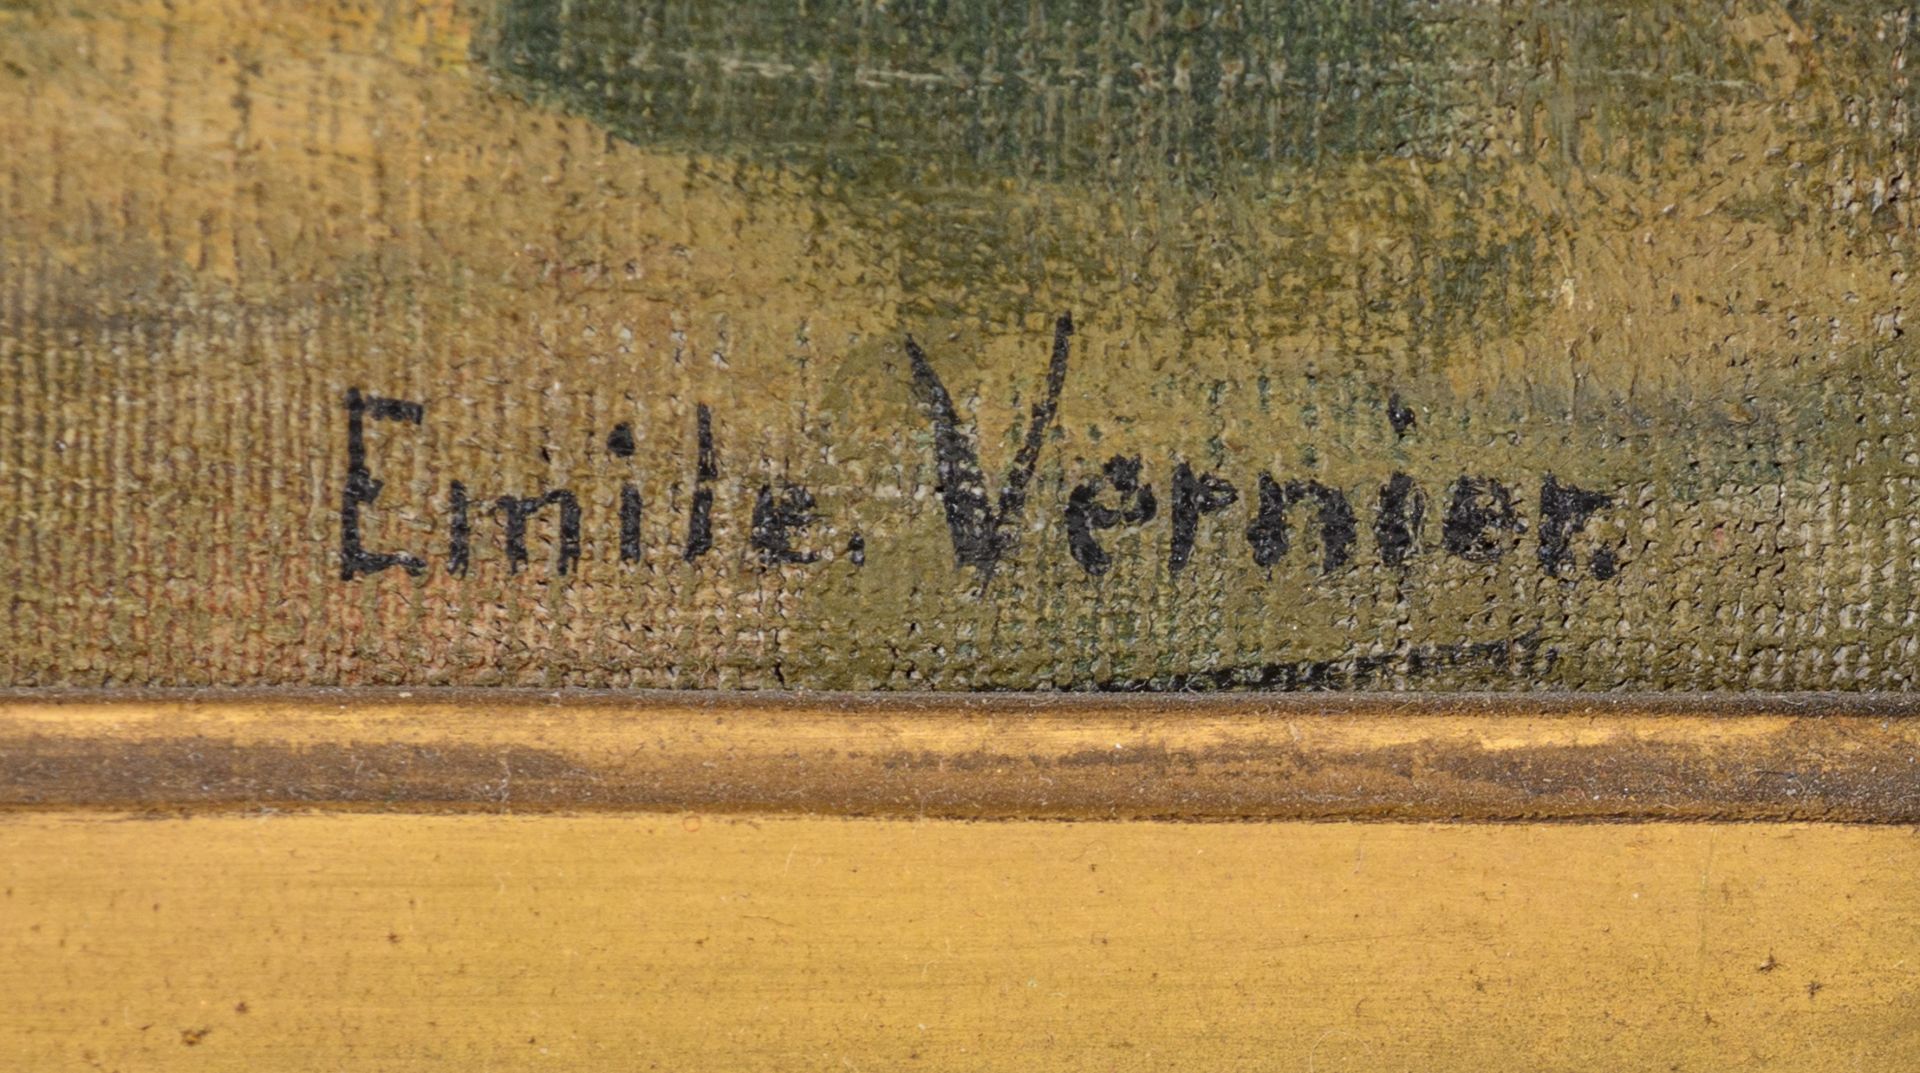 Vernier E., a Southern view near the water, oil on canvas, 38 x 55,5 cm - Image 4 of 7